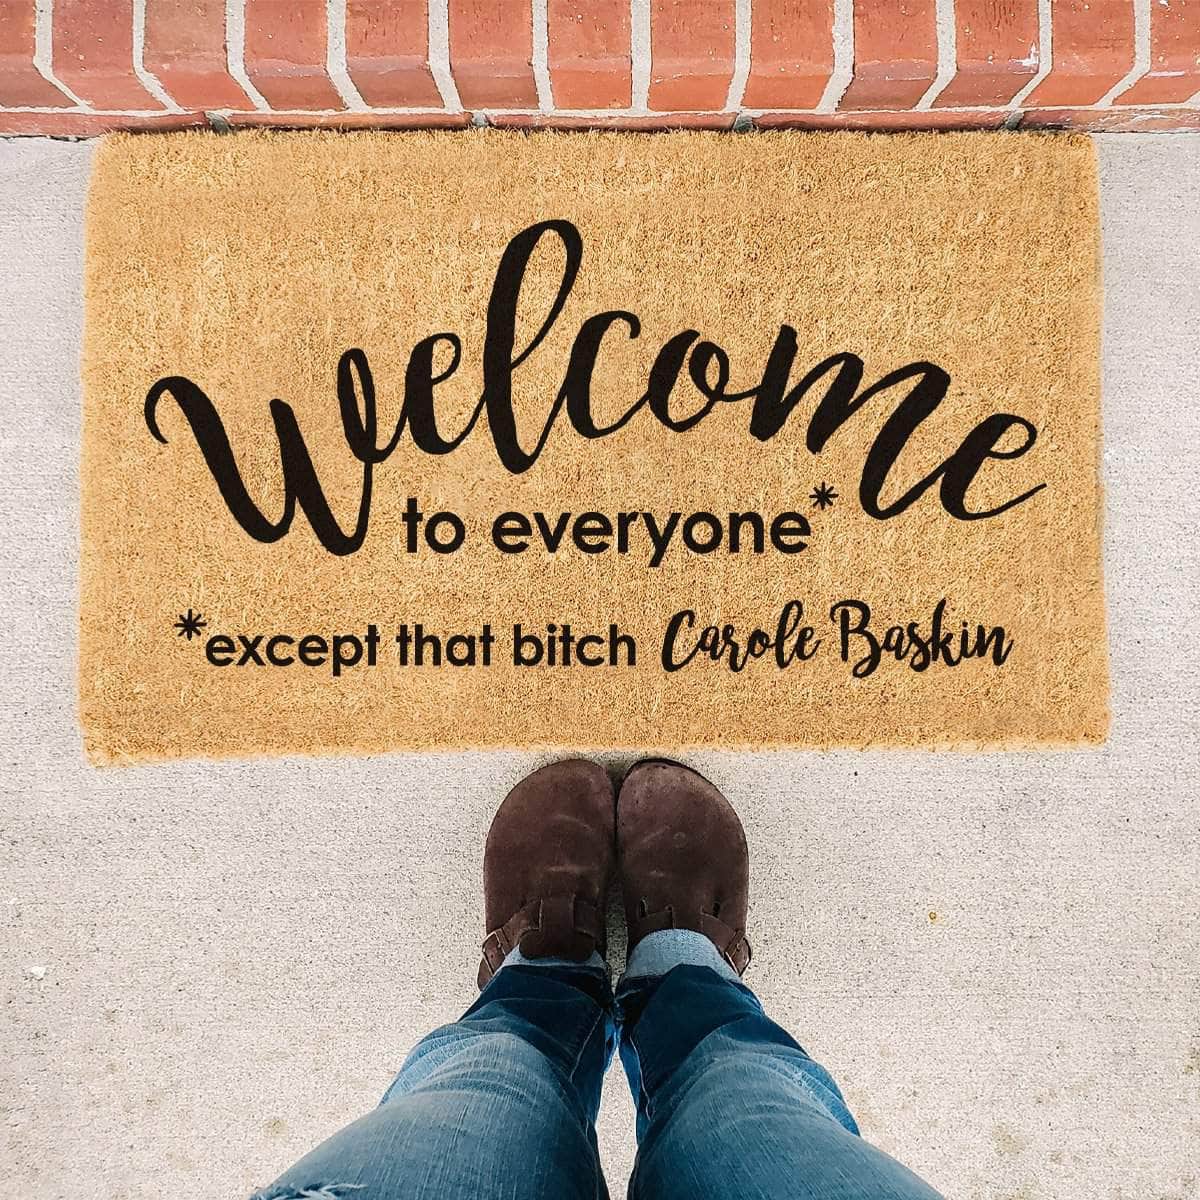 Welcome to everyone except that bitch Carole Baskin - Doormat